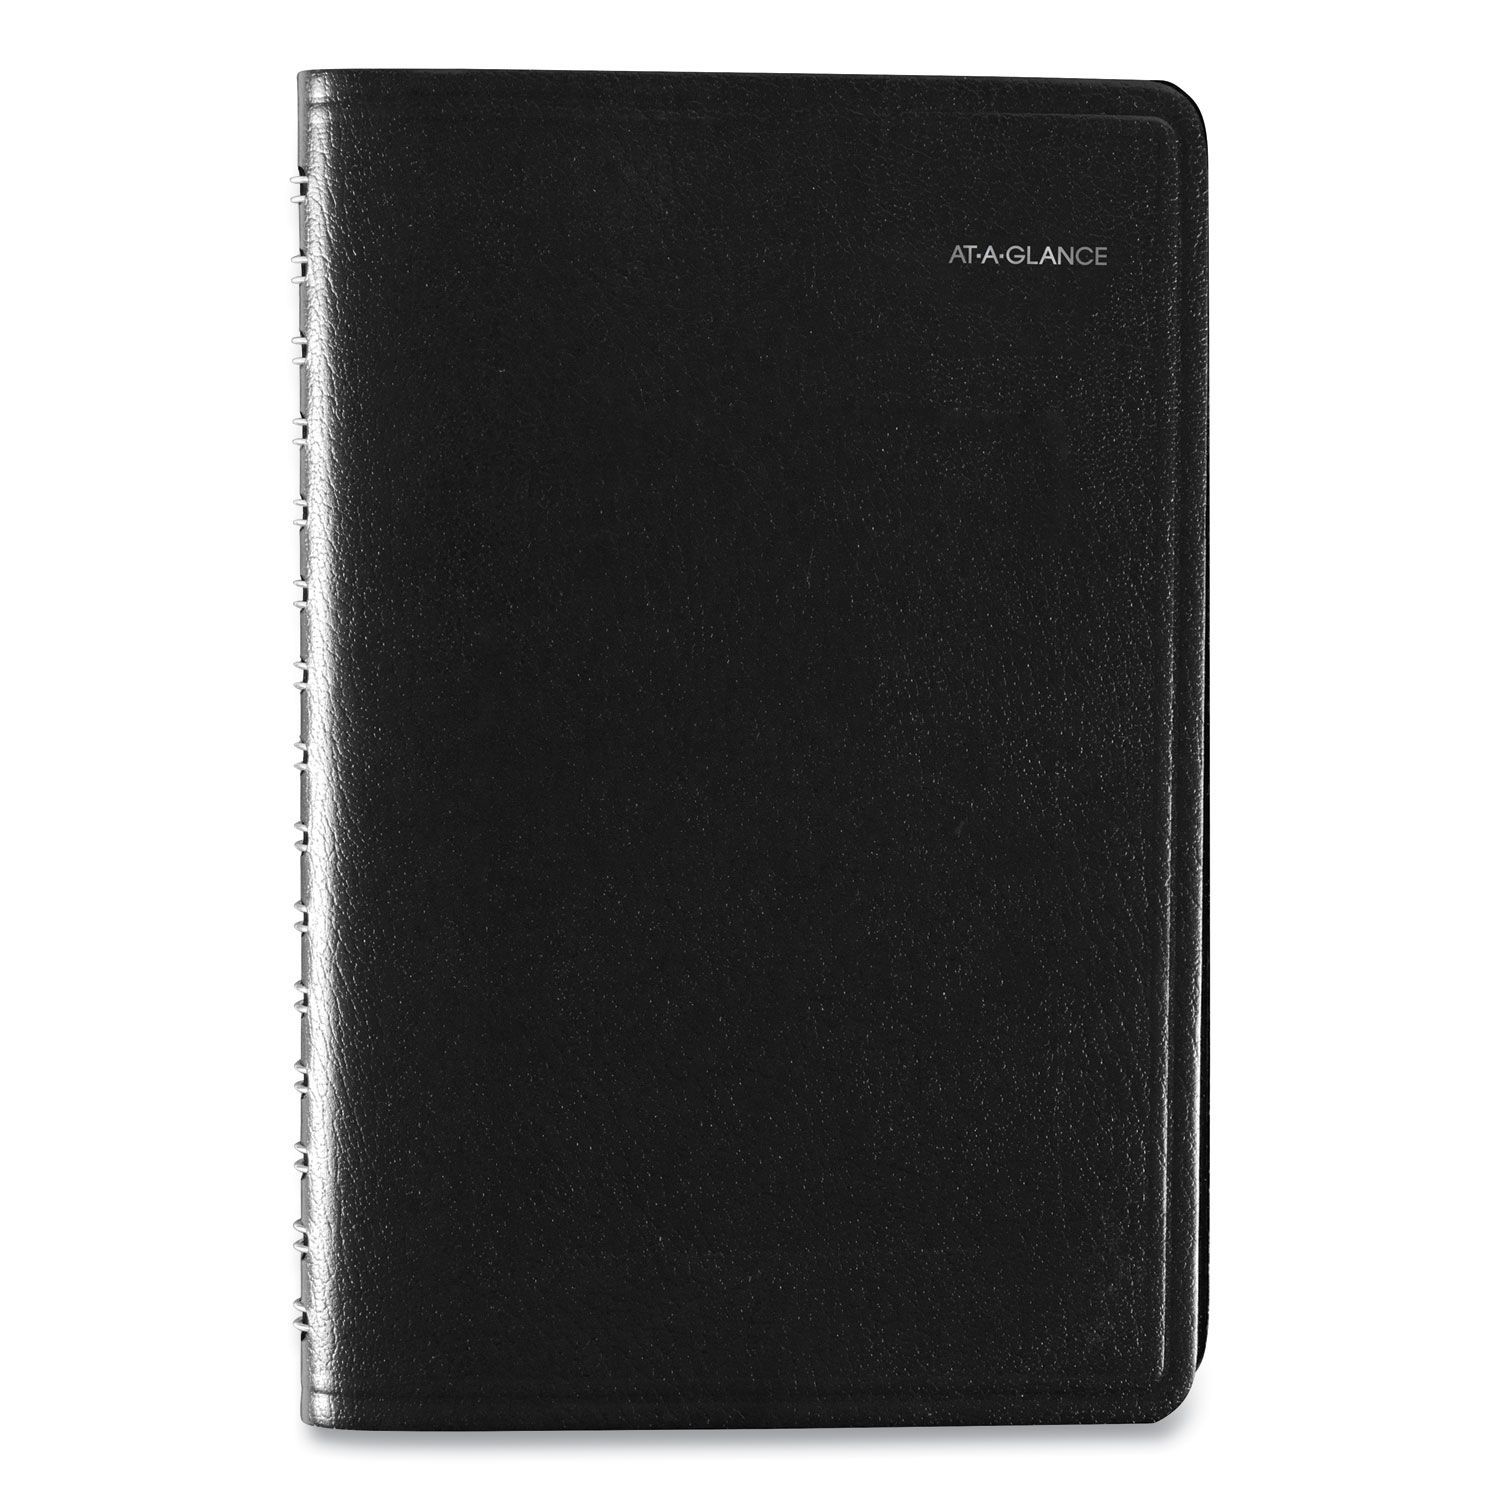 Daily Appointment Book With15 Minute Appointments, 8 X 4 7/8, Black, 2020